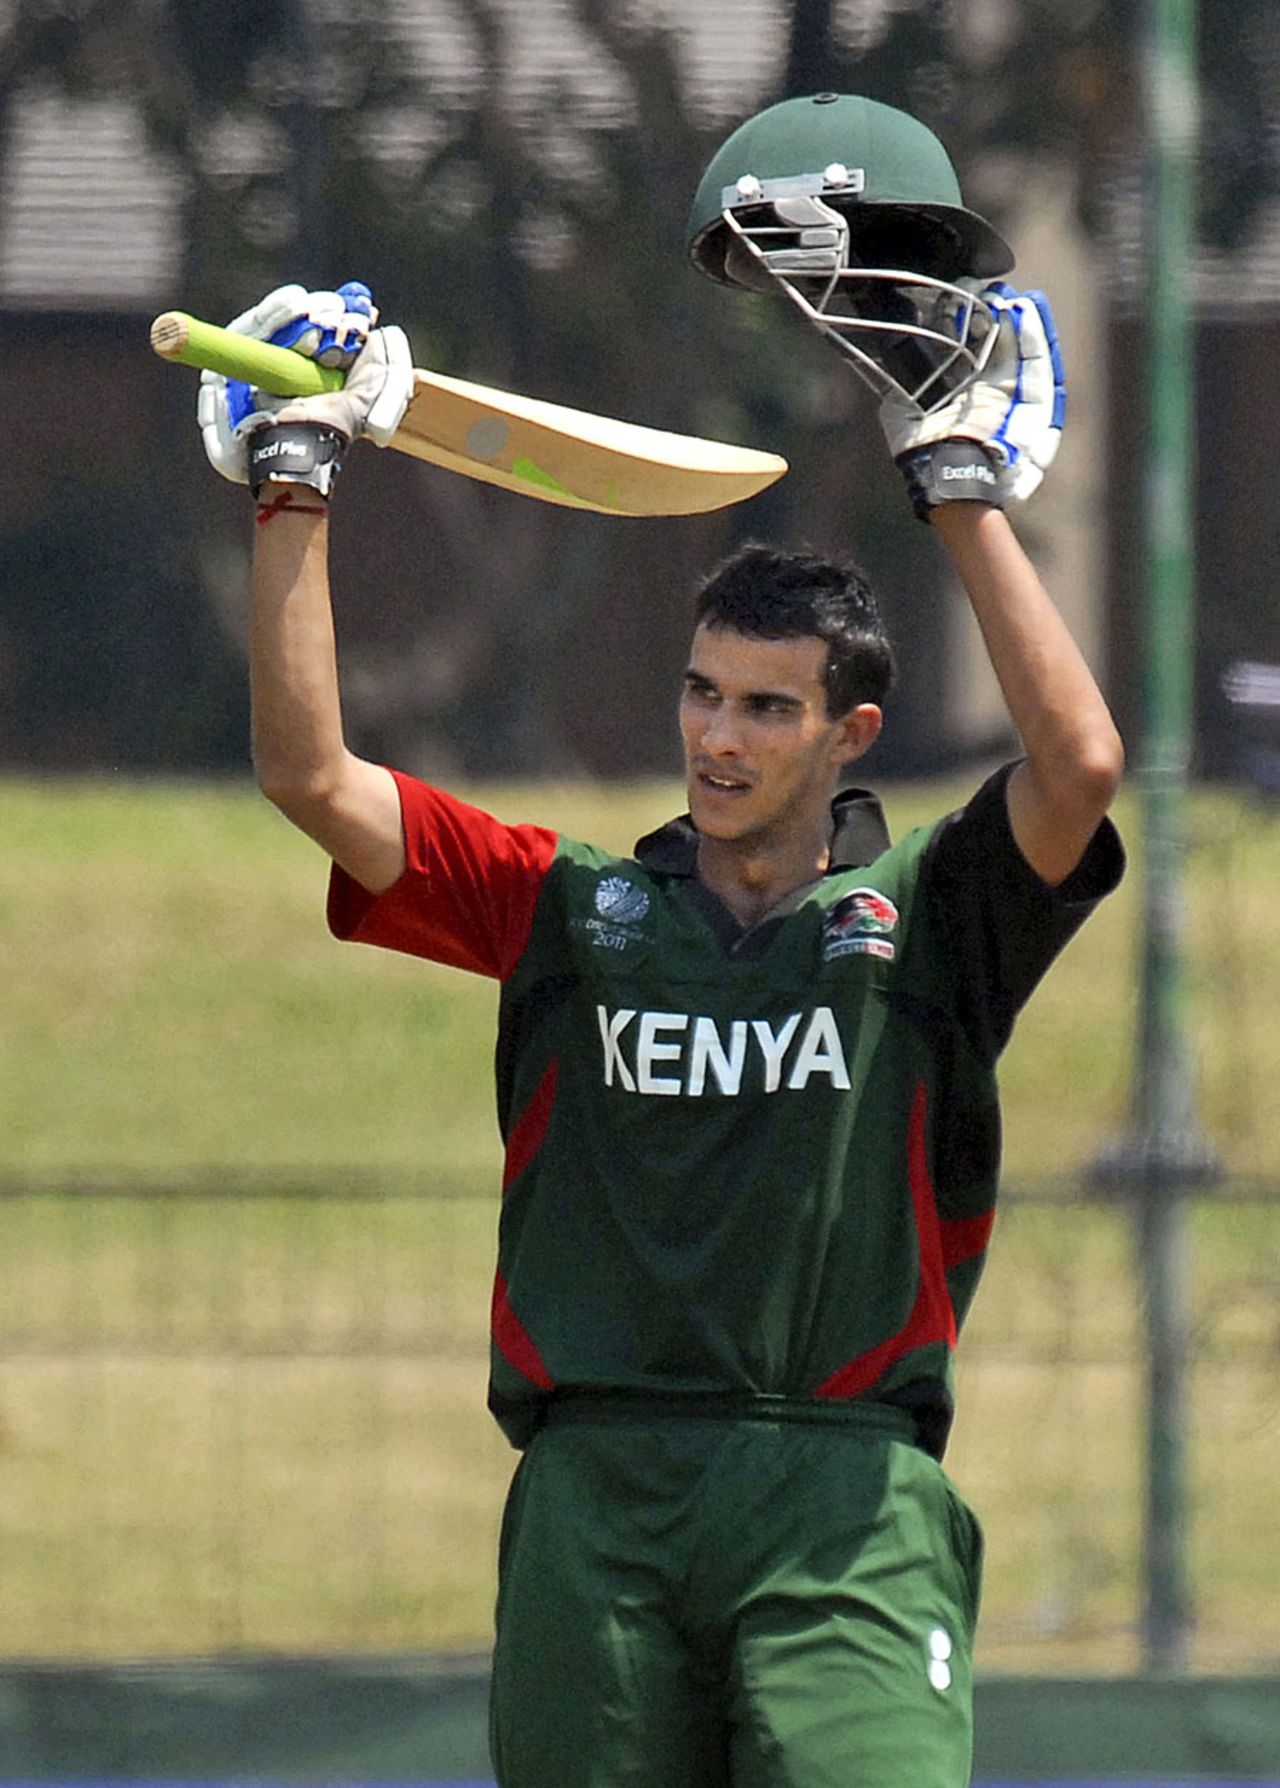 Kenya's Seren Waters celebrates his century against Netherlands, Kenya v Netherlands World Cup warm-up match, Sinhalese Sports Club, Colombo, February 15, 2011